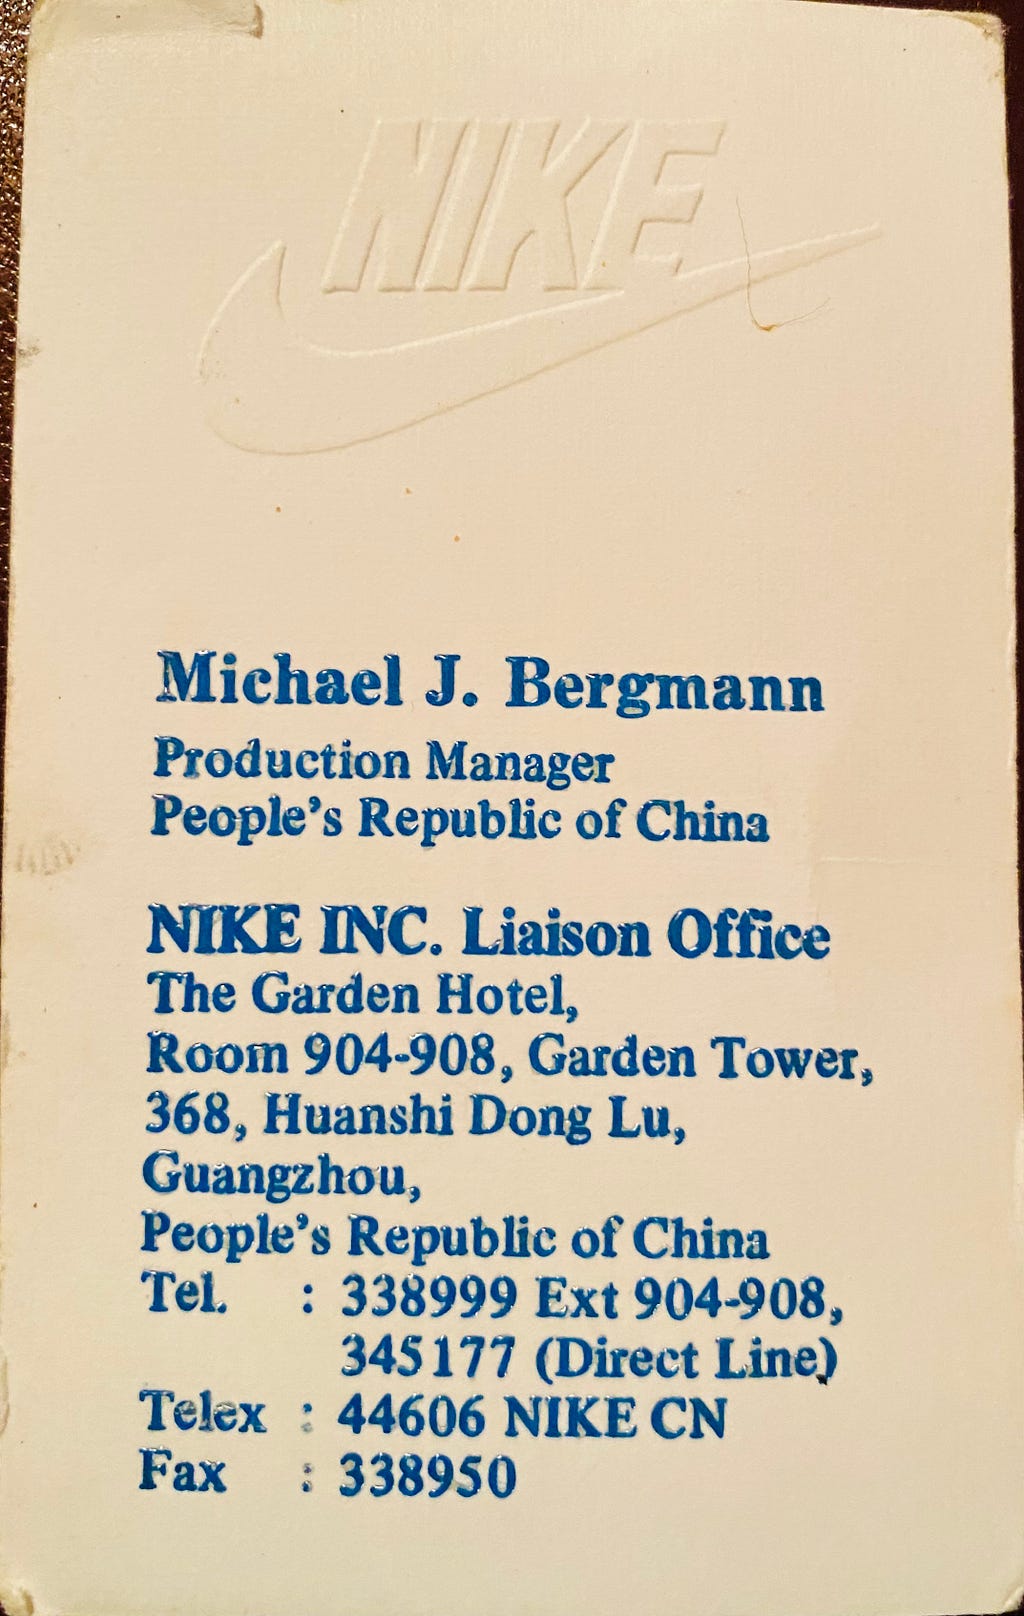 Michael Bergmann’s business card from 1988 as a 28 year old getting experience as a production manager in the Peoples Republic of China